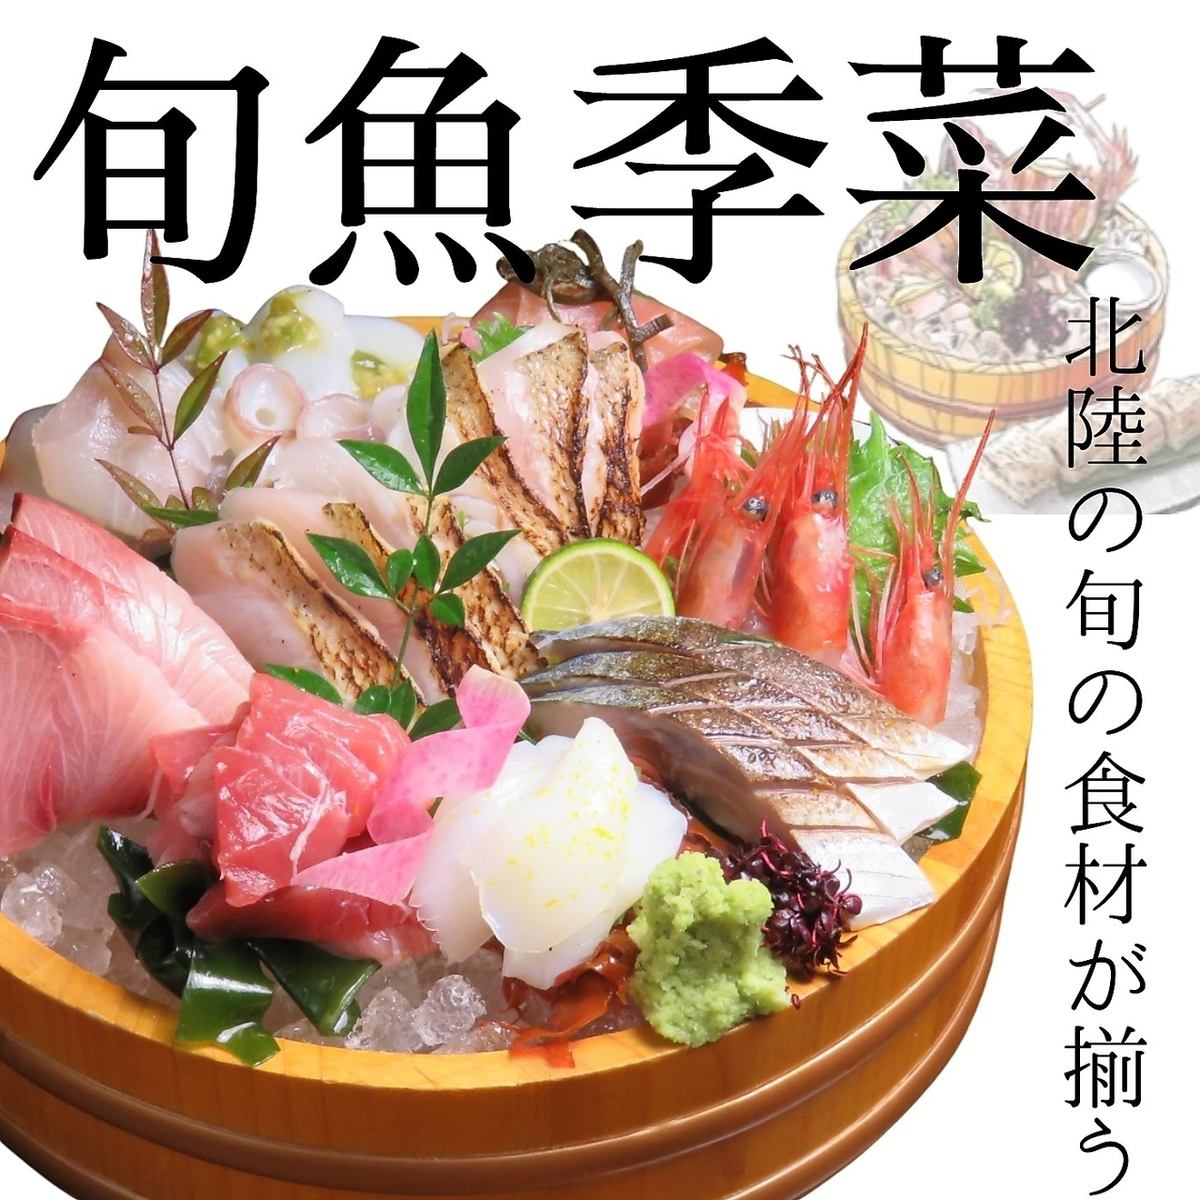 You can enjoy the sashimi of fresh fish caught in the morning of Noto Kanazawa purchased by the chef at the market.